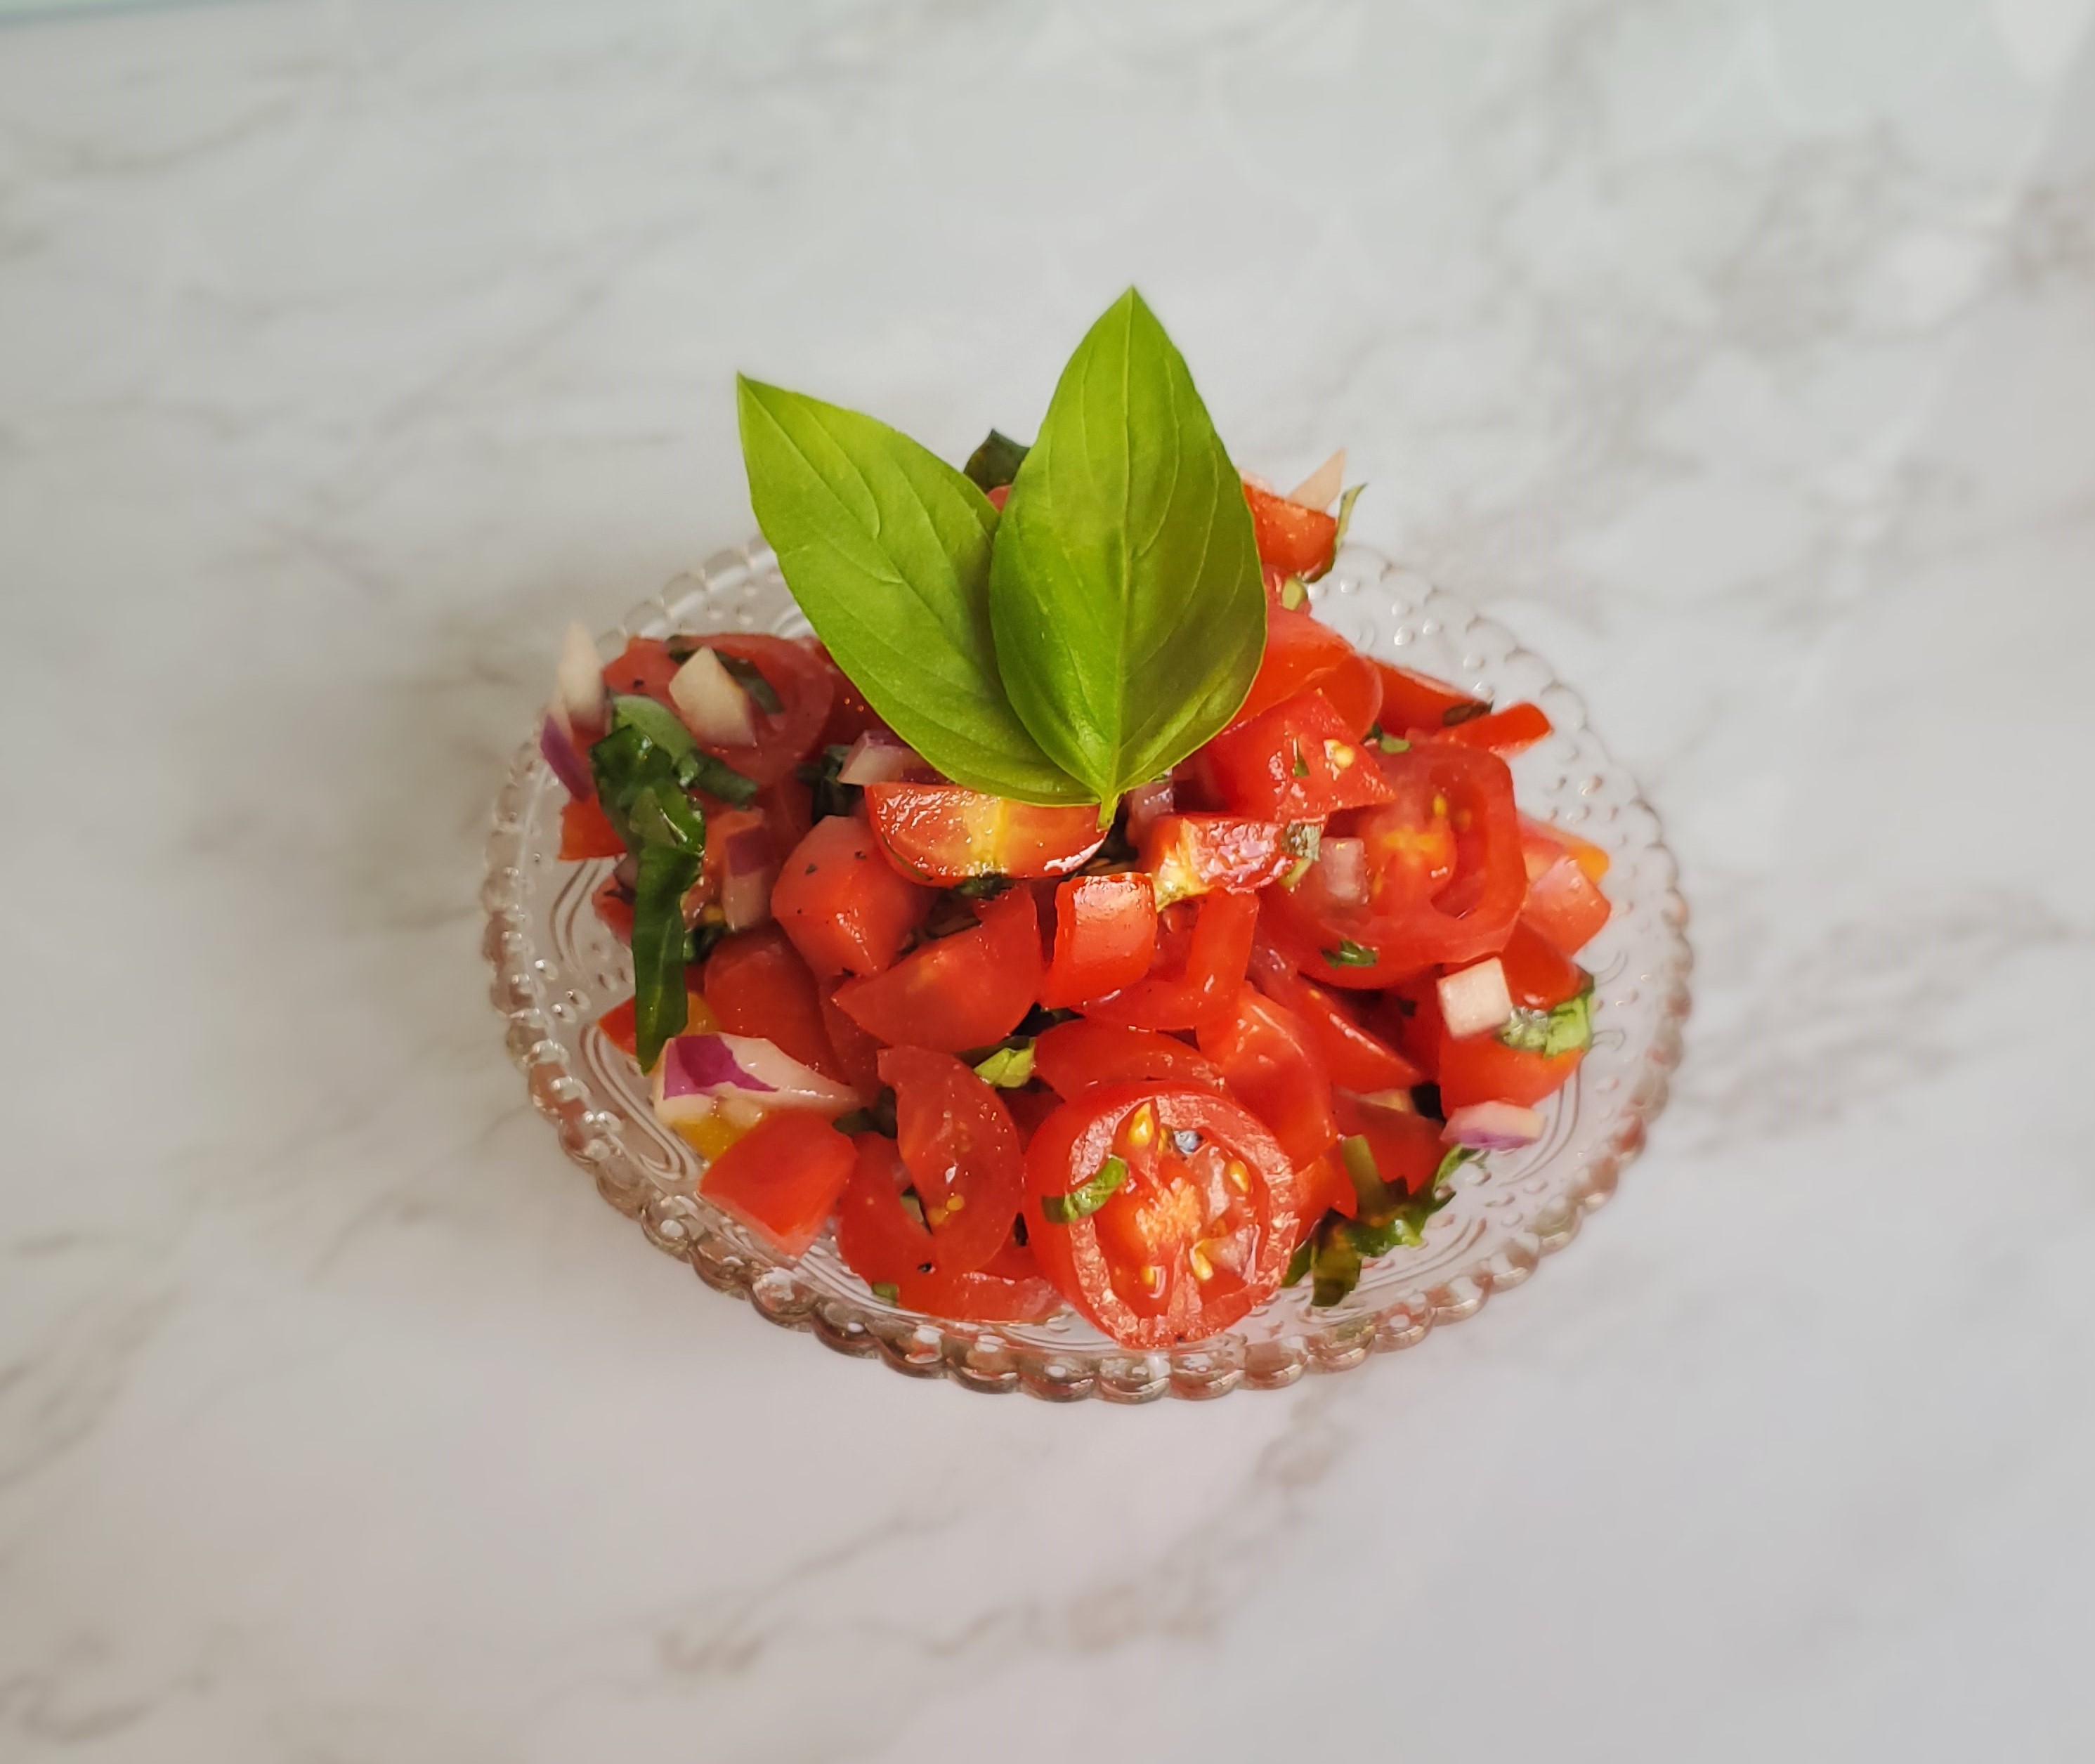 Bruschetta in a vintage glass bowl on top of a marble countertop.